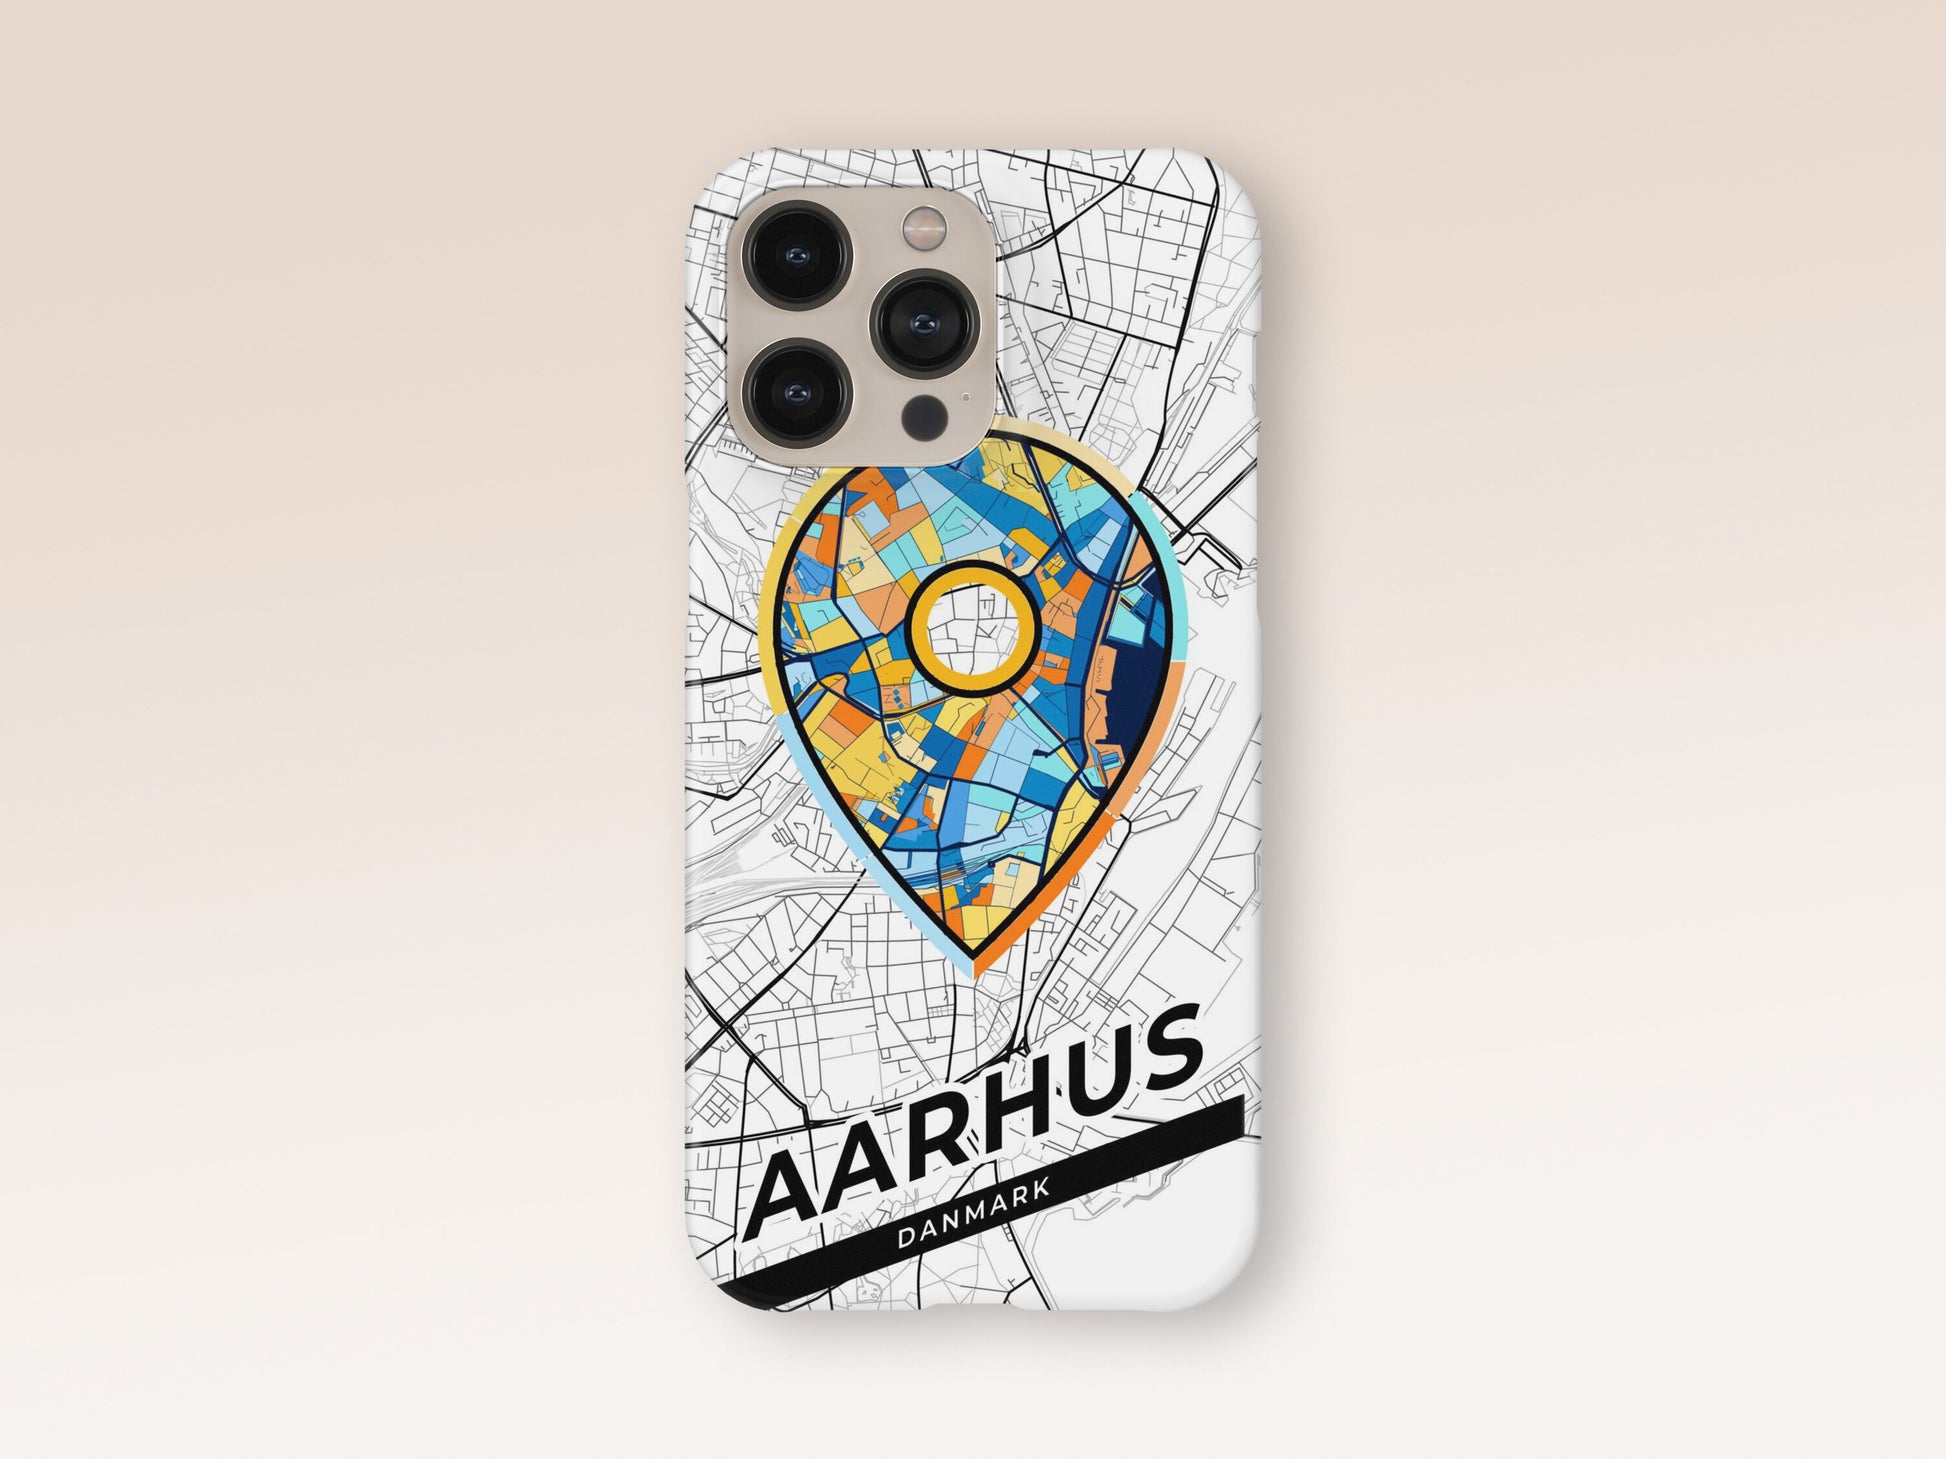 Aarhus Danmark slim phone case with colorful icon. Birthday, wedding or housewarming gift. Couple match cases. 1